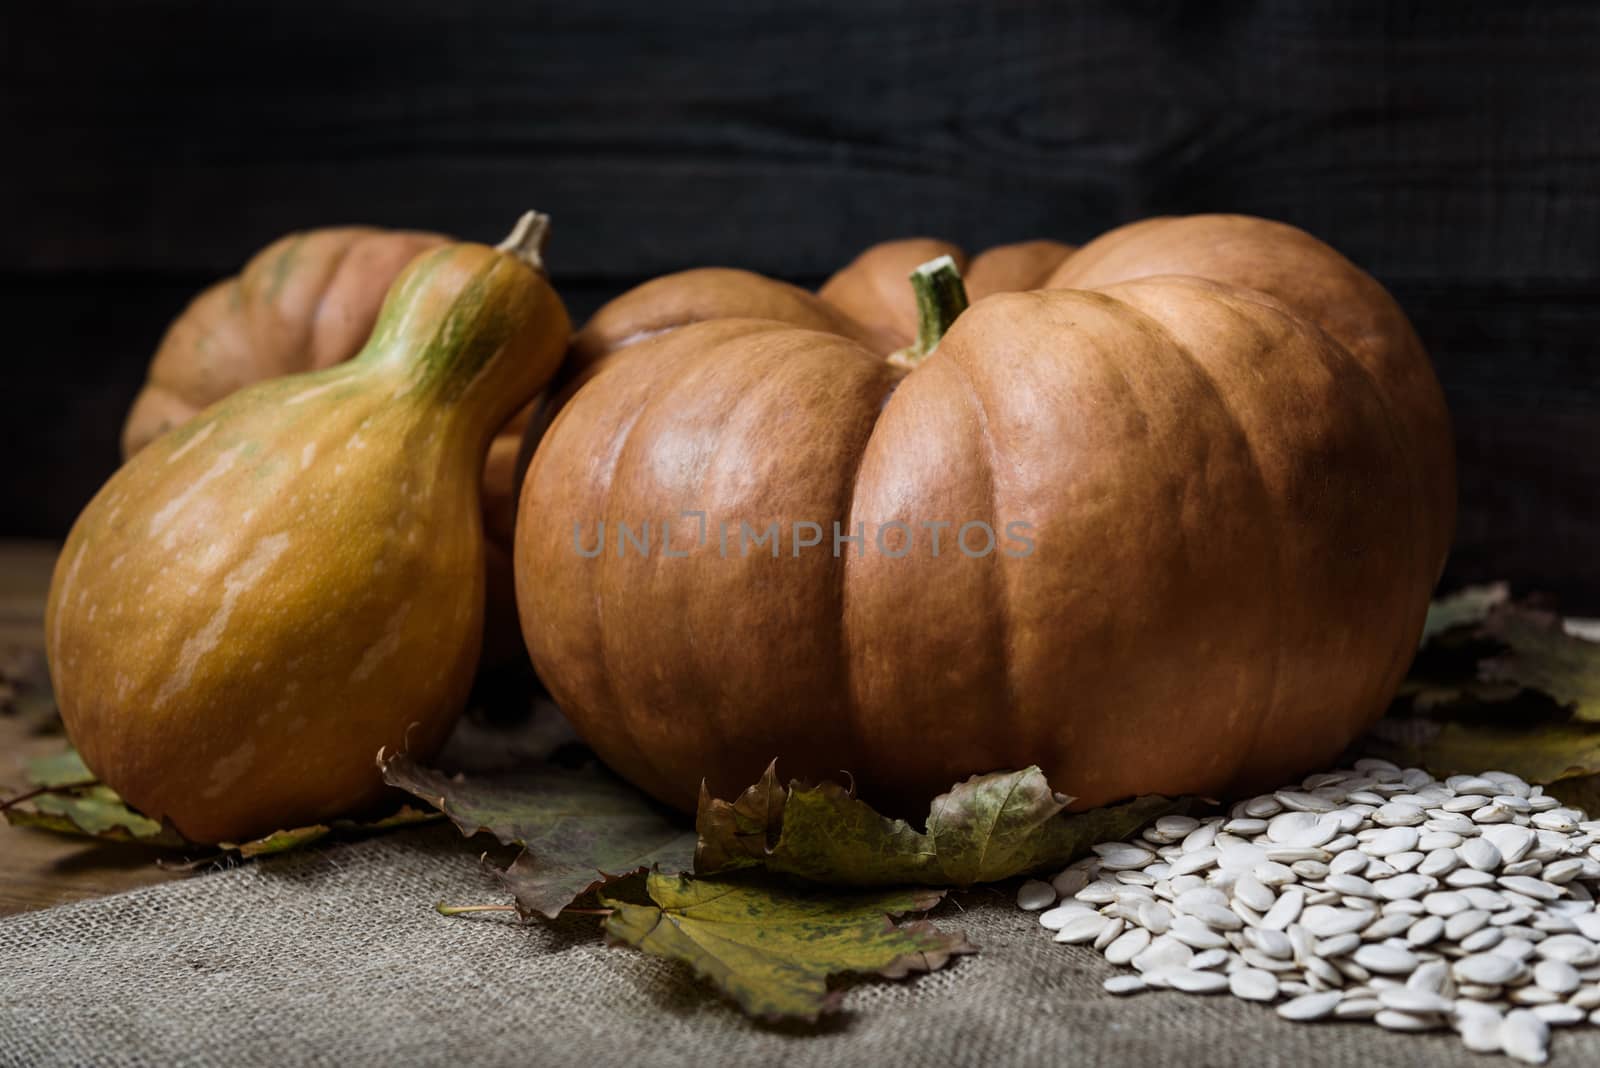 pumpkins lying on a wooden table with viburnum and seeds